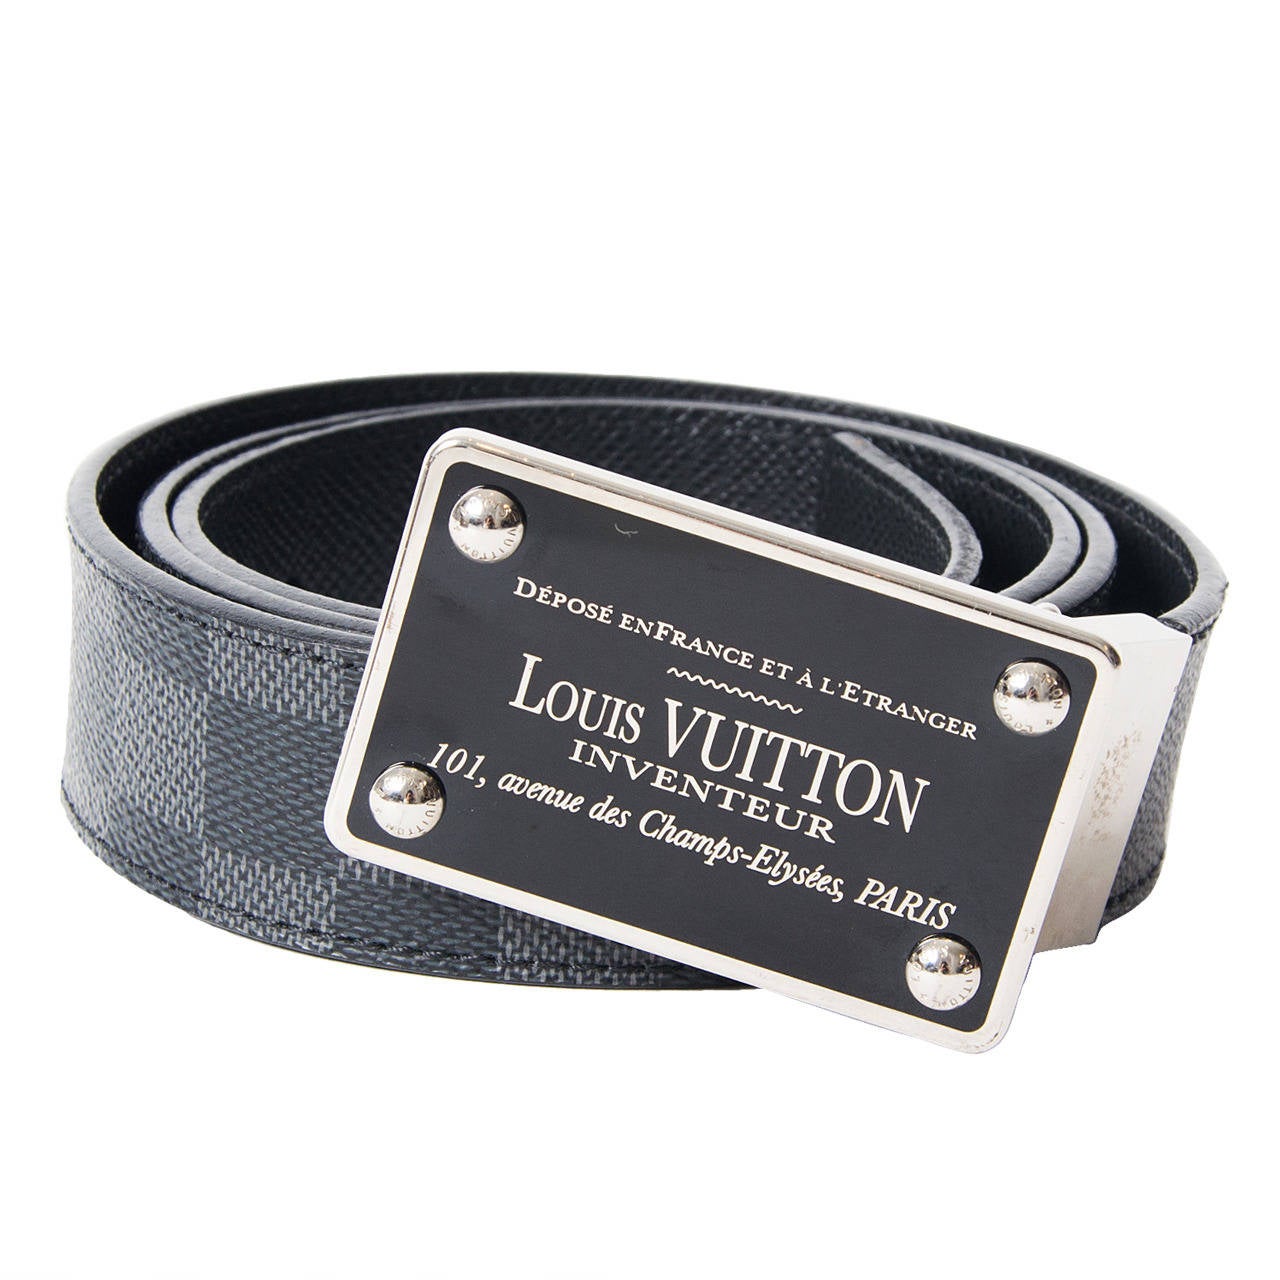 Black Louis Vuitton Mens Belt | Confederated Tribes of the Umatilla Indian Reservation